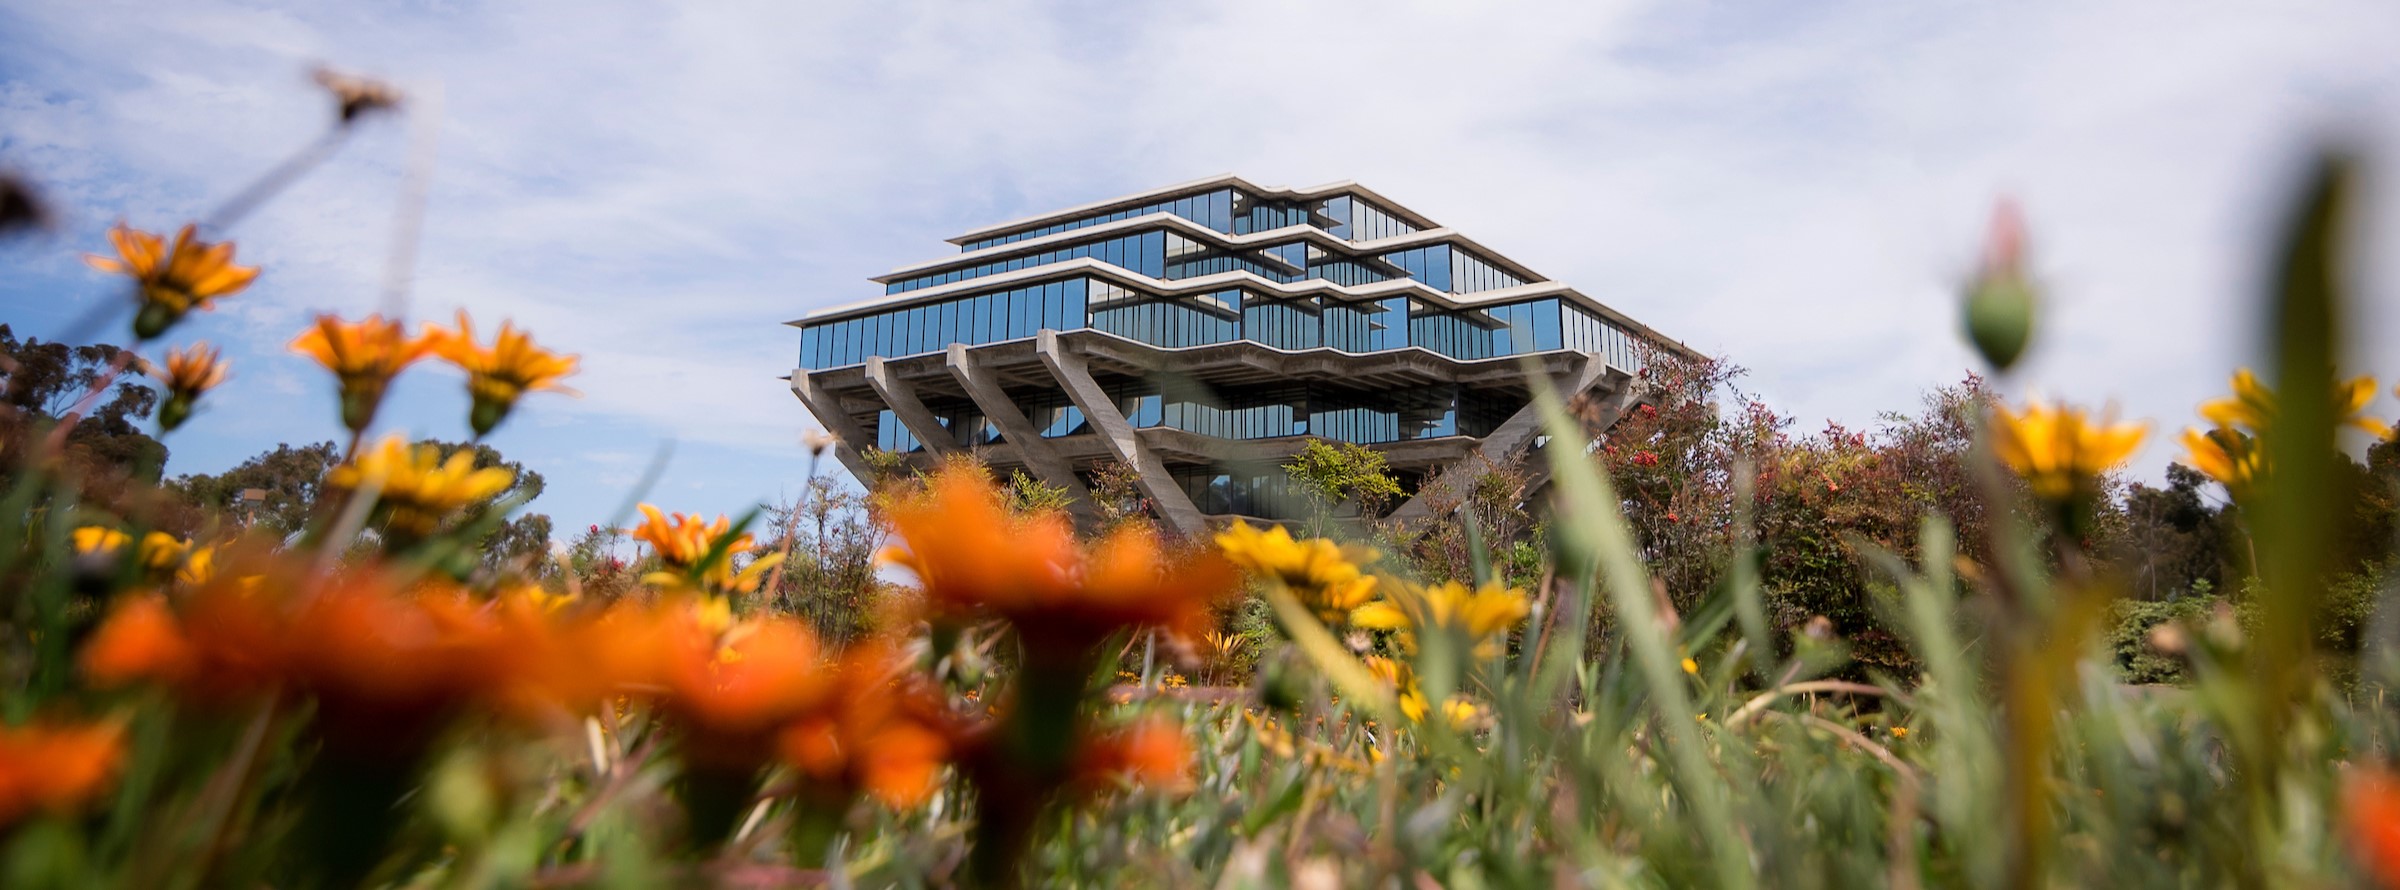 Geisel Library at UC San Diego - exterior photo of the building with flowers in the foreground